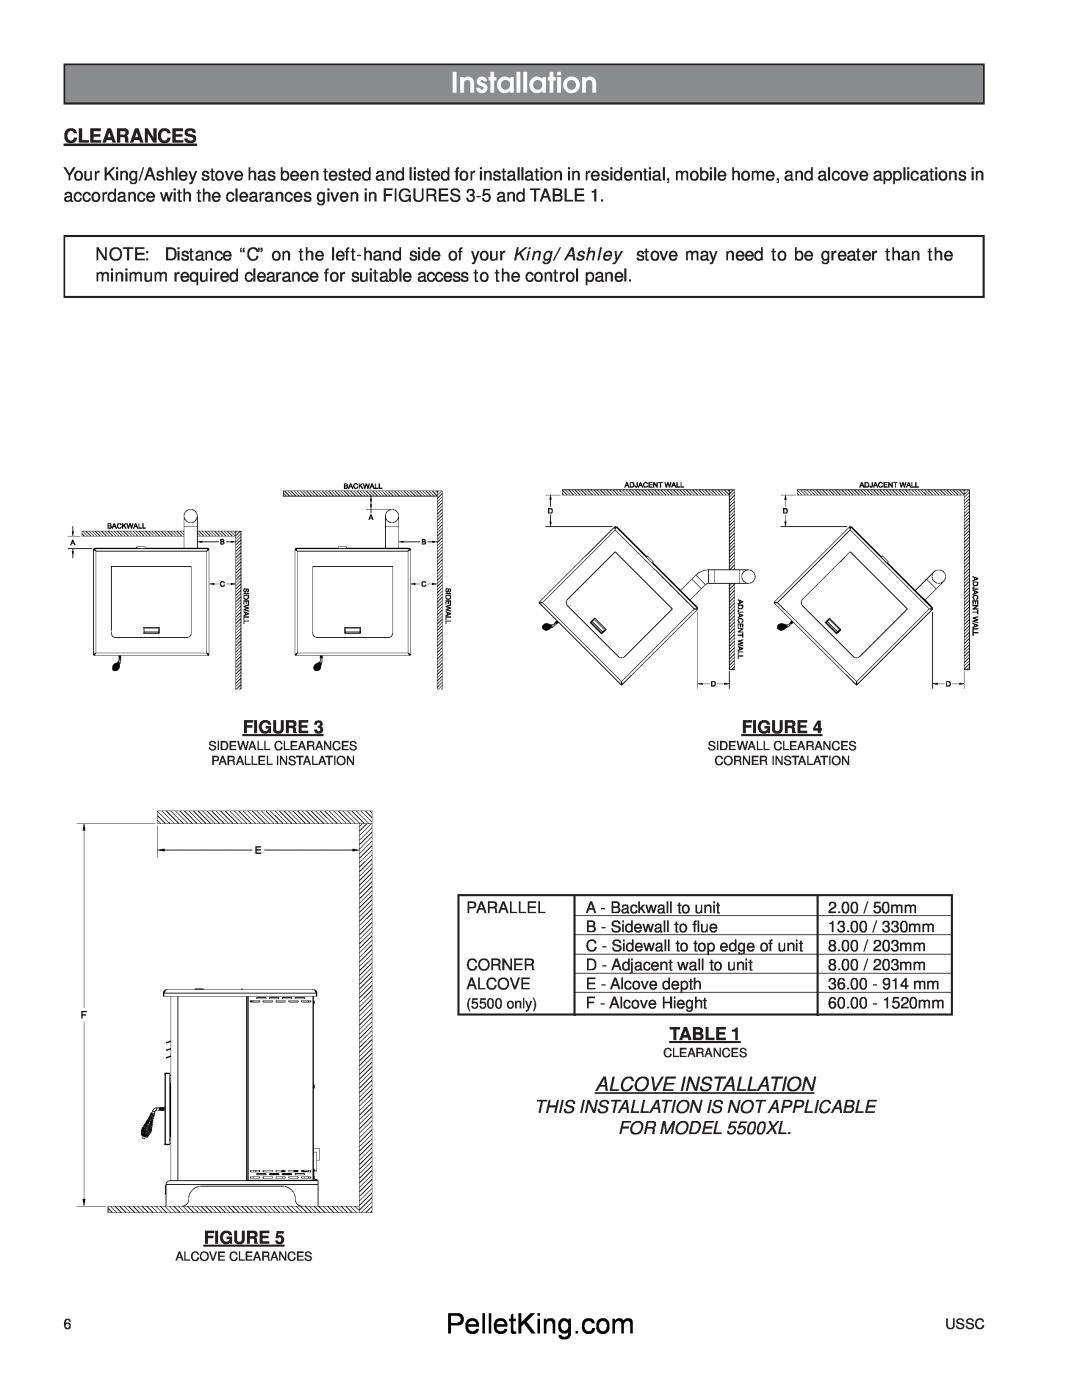 United States Stove 5500/5500XL Clearances, Alcove Installation, This Installation Is Not Applicable, FOR MODEL 5500XL 